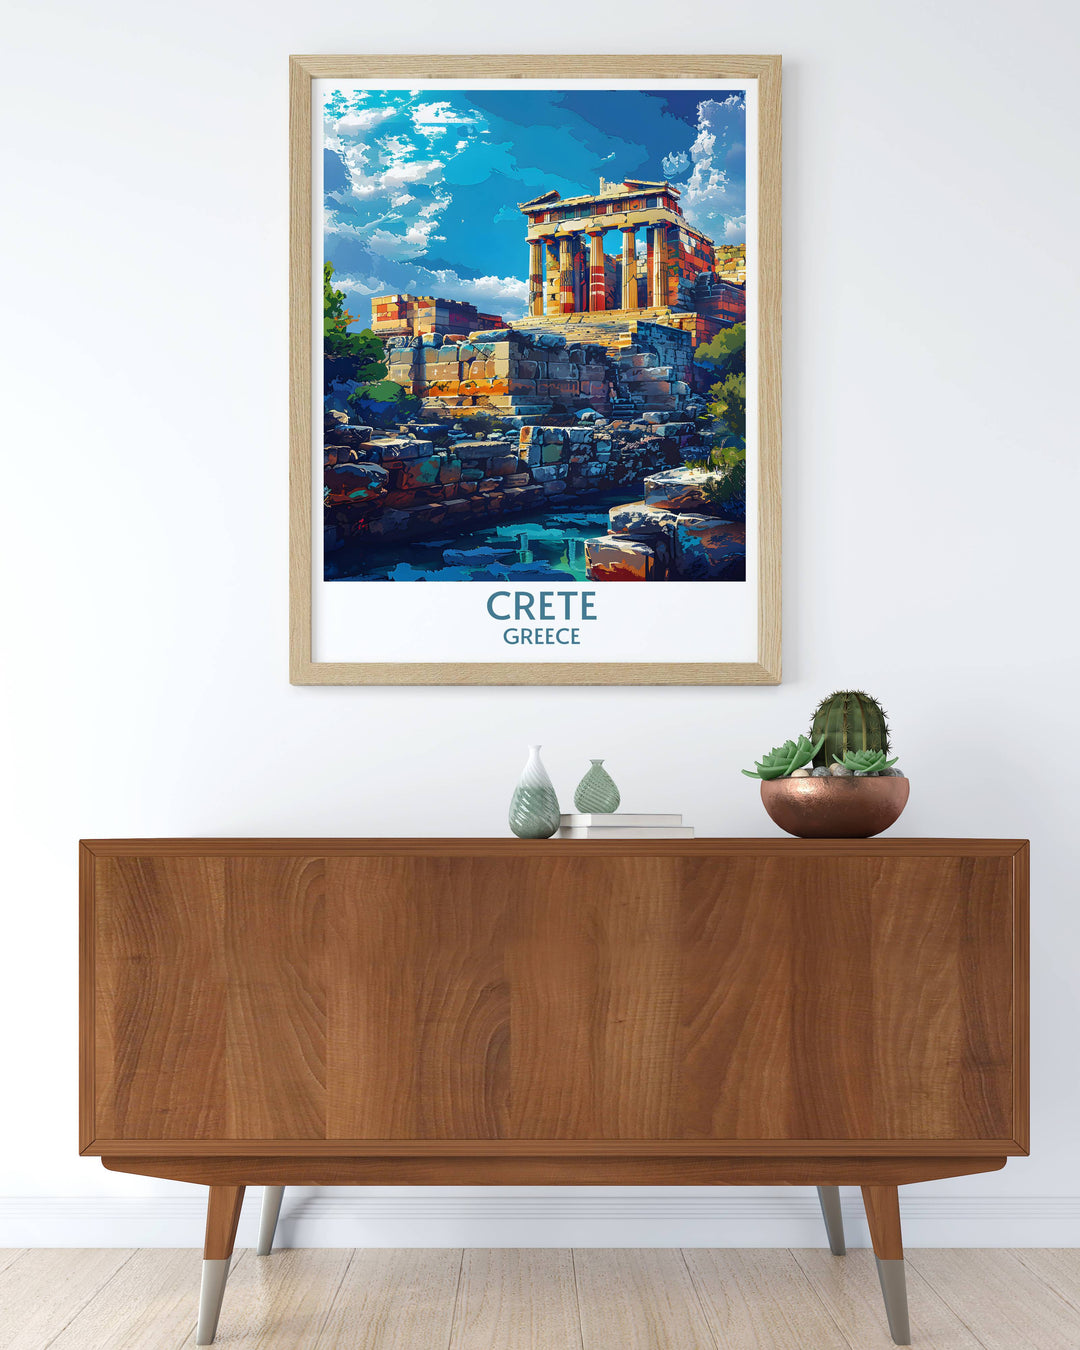 A picturesque scene of Chania city, emphasizing its Venetian Port and lively street markets in a beautifully crafted poster